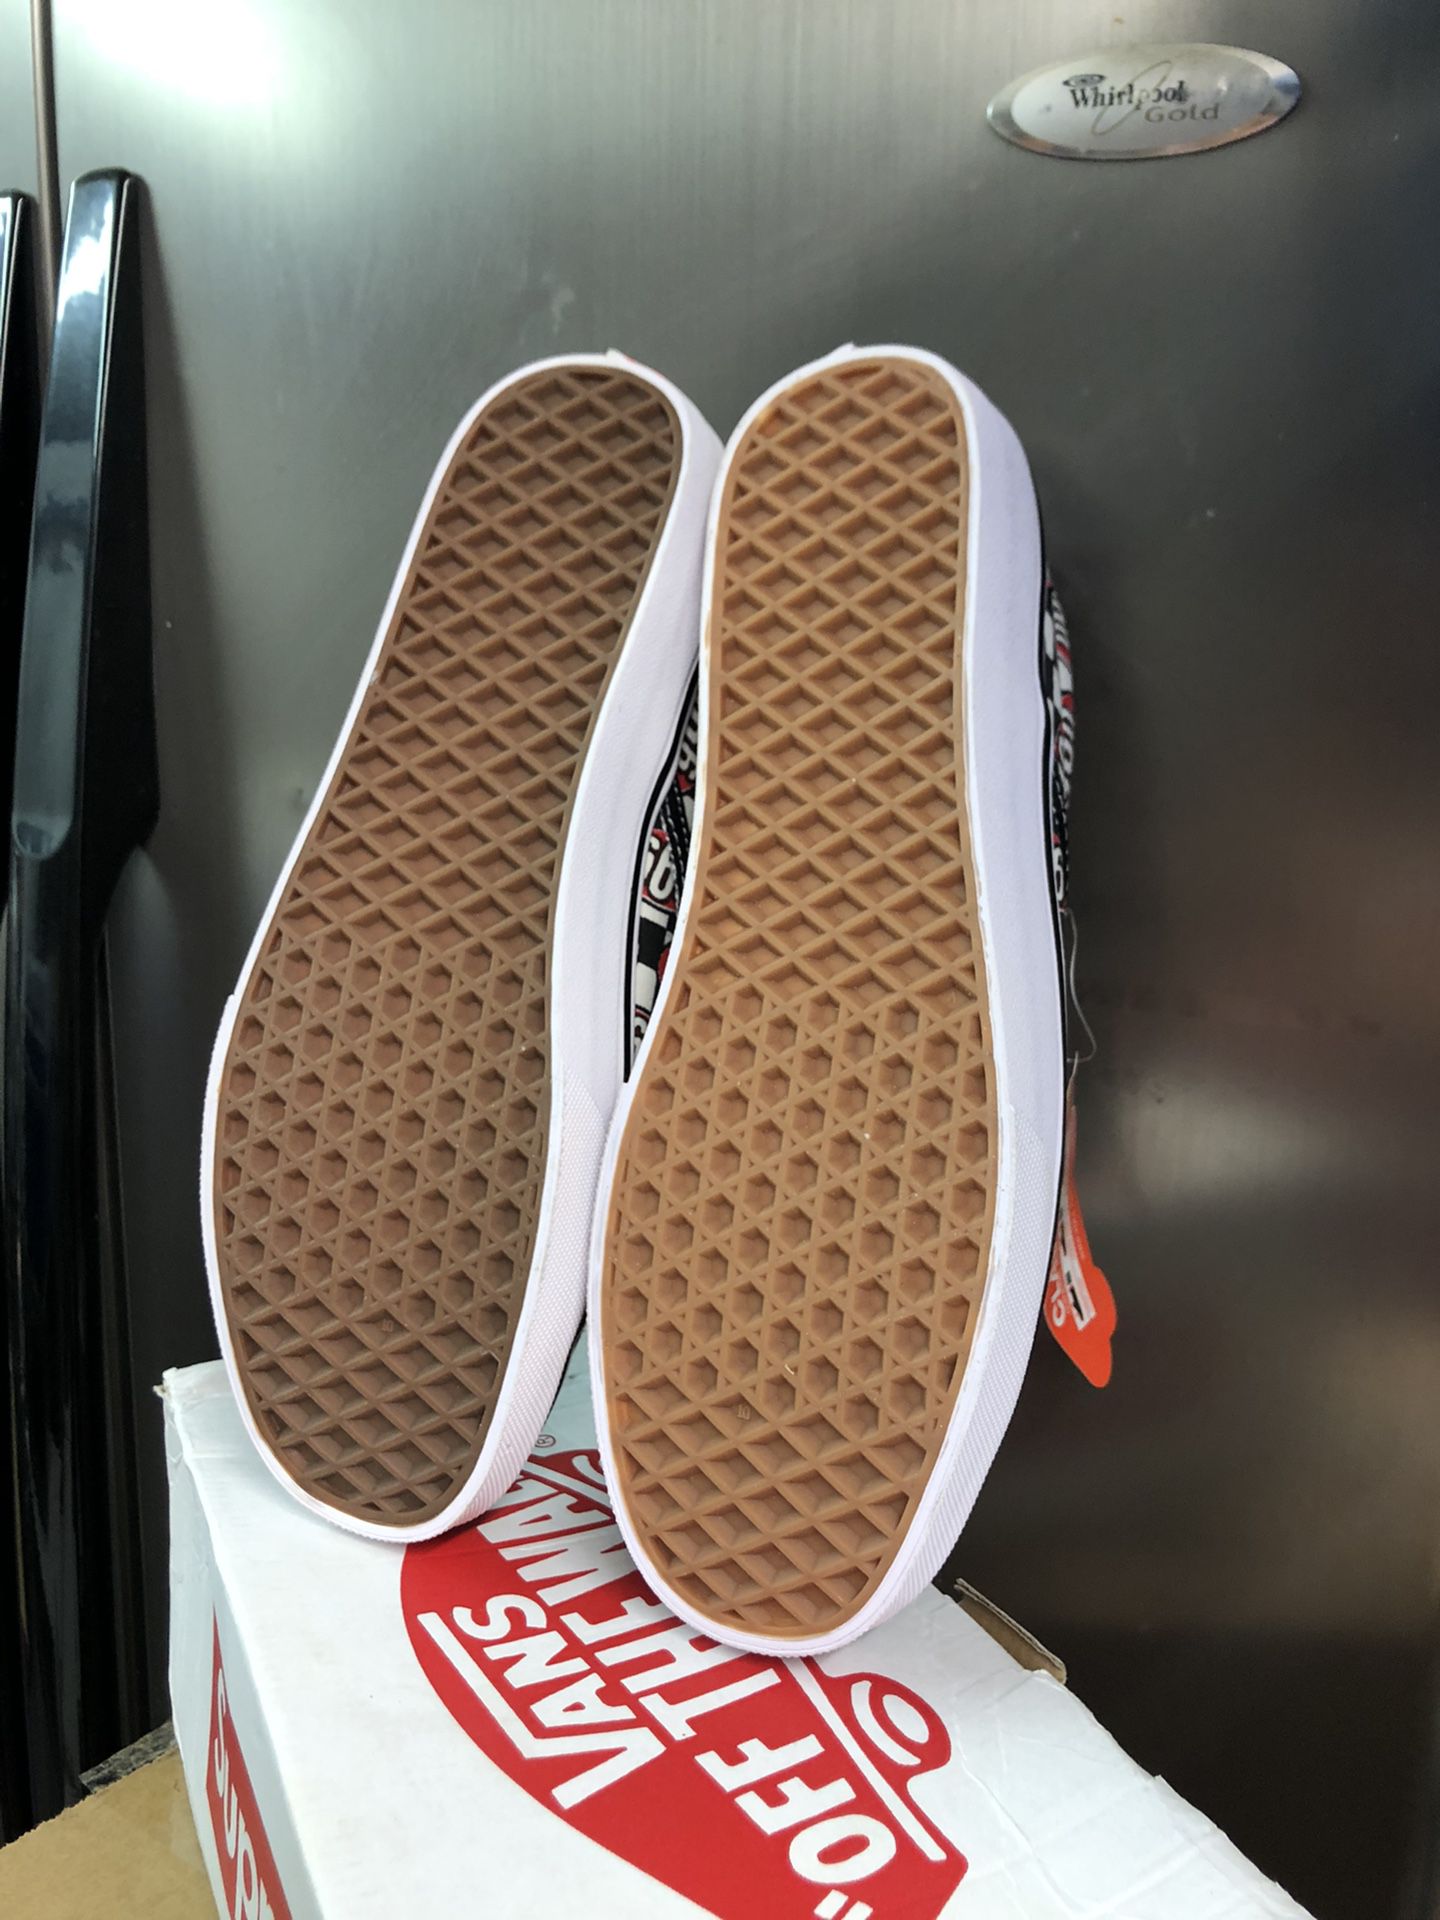 Supreme x Vans Slip-ons (666) Sz 10 for Sale in Bronx, NY - OfferUp